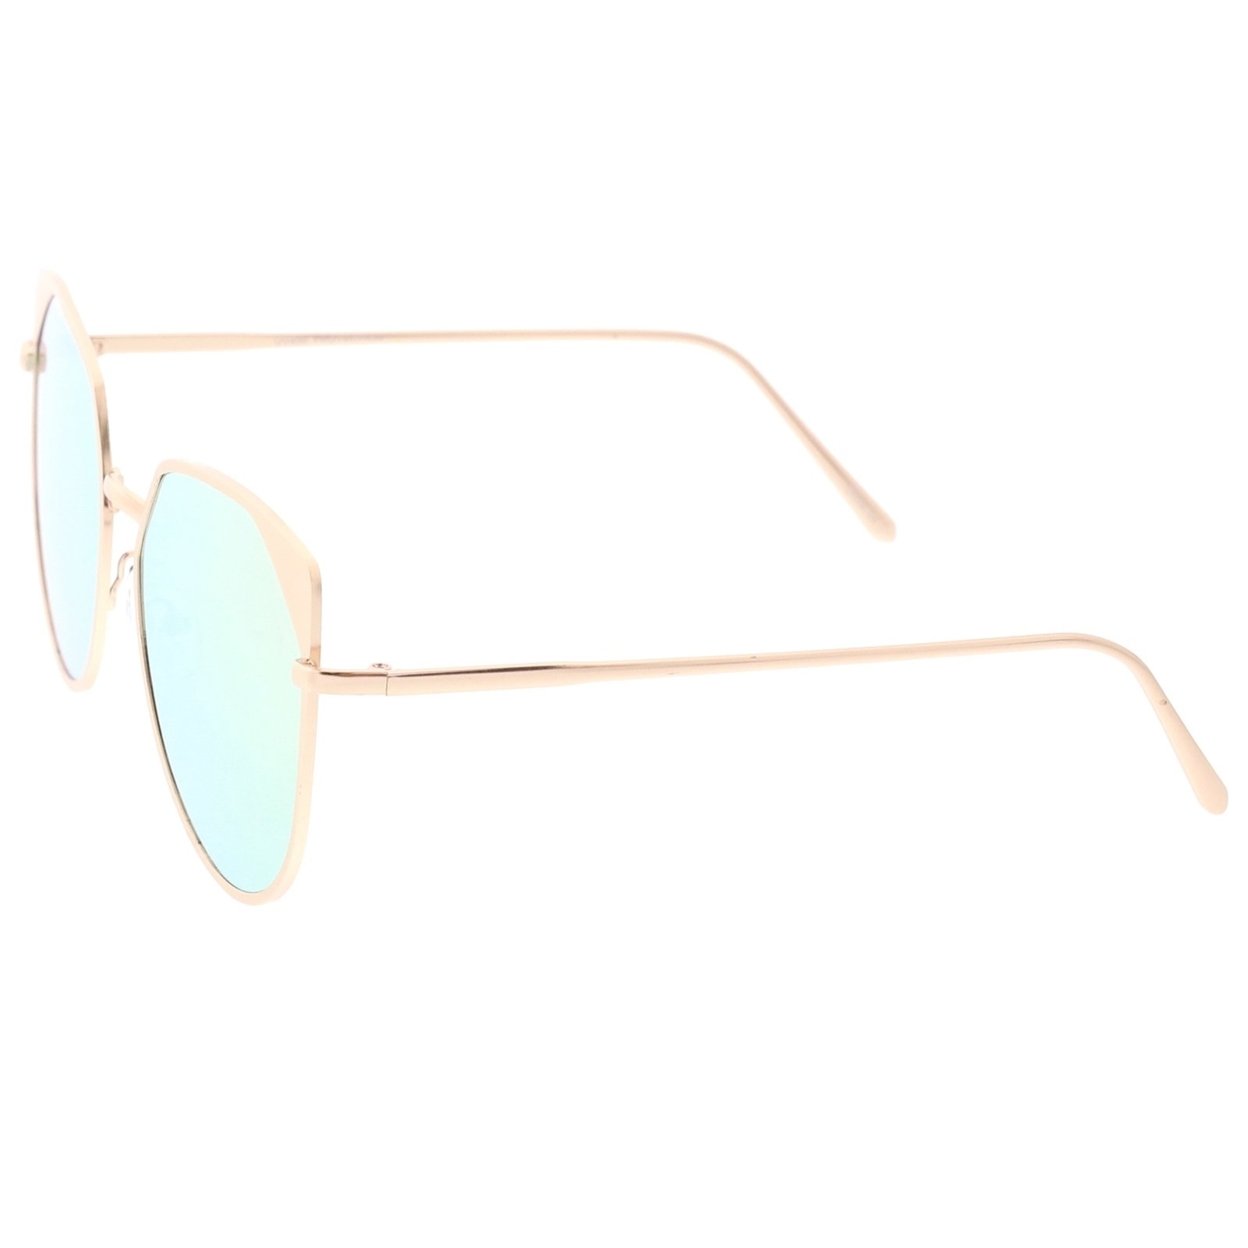 Women's Oversize Cat Eye Sunglasses With Pink Colored Mirror Flat Lens 59mm - Gold / Pink Mirror